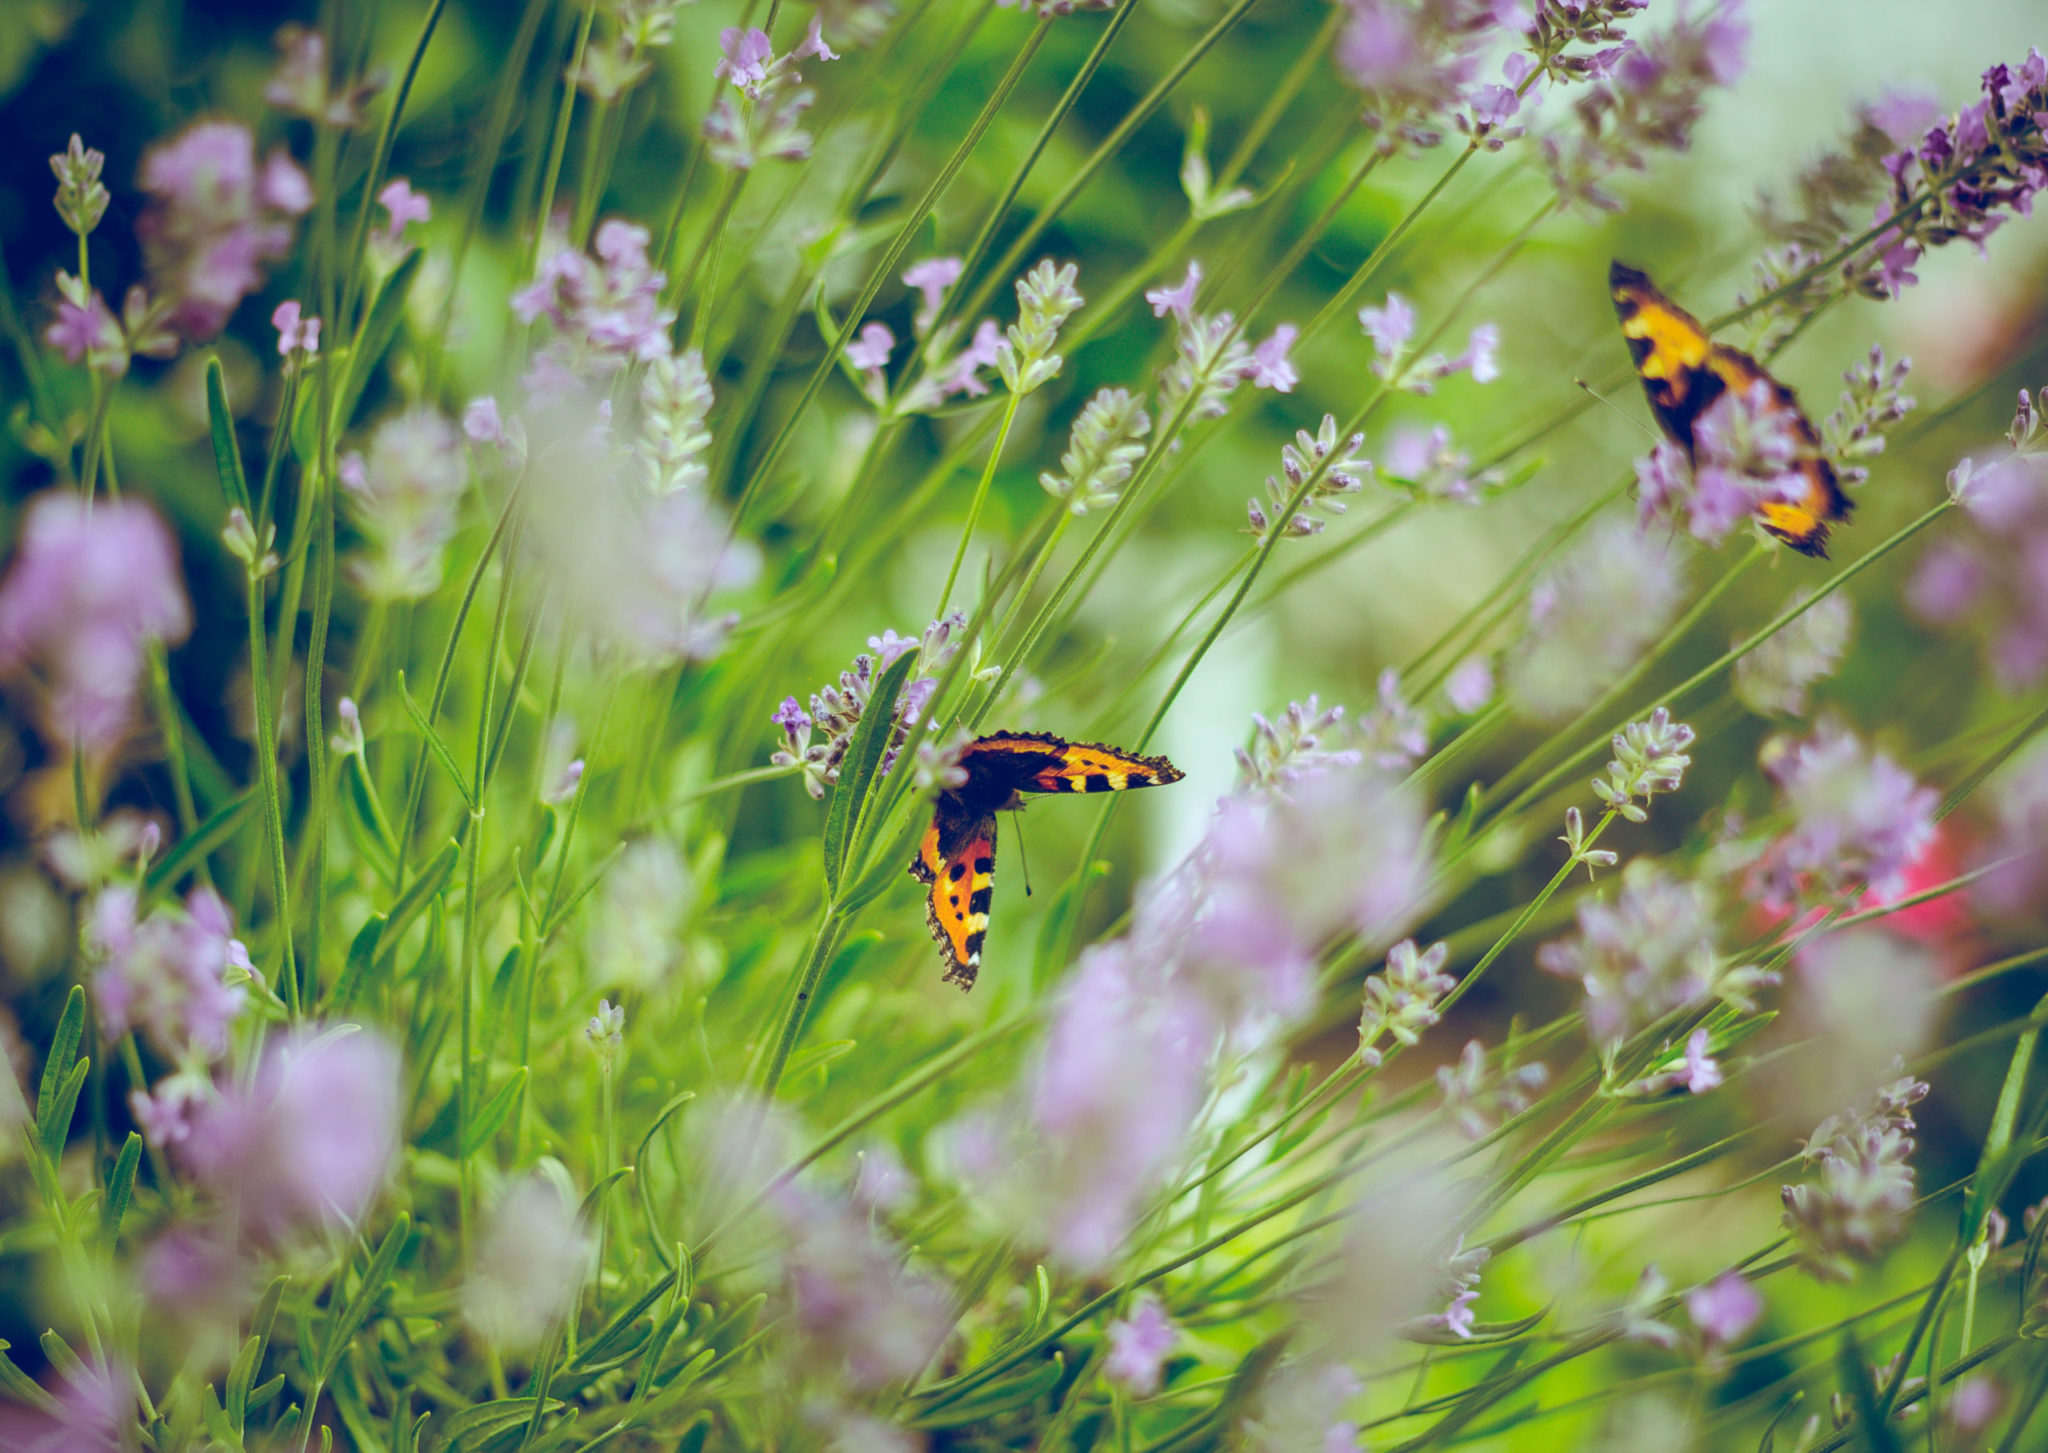 Two butterflies rest on a lavender plant.